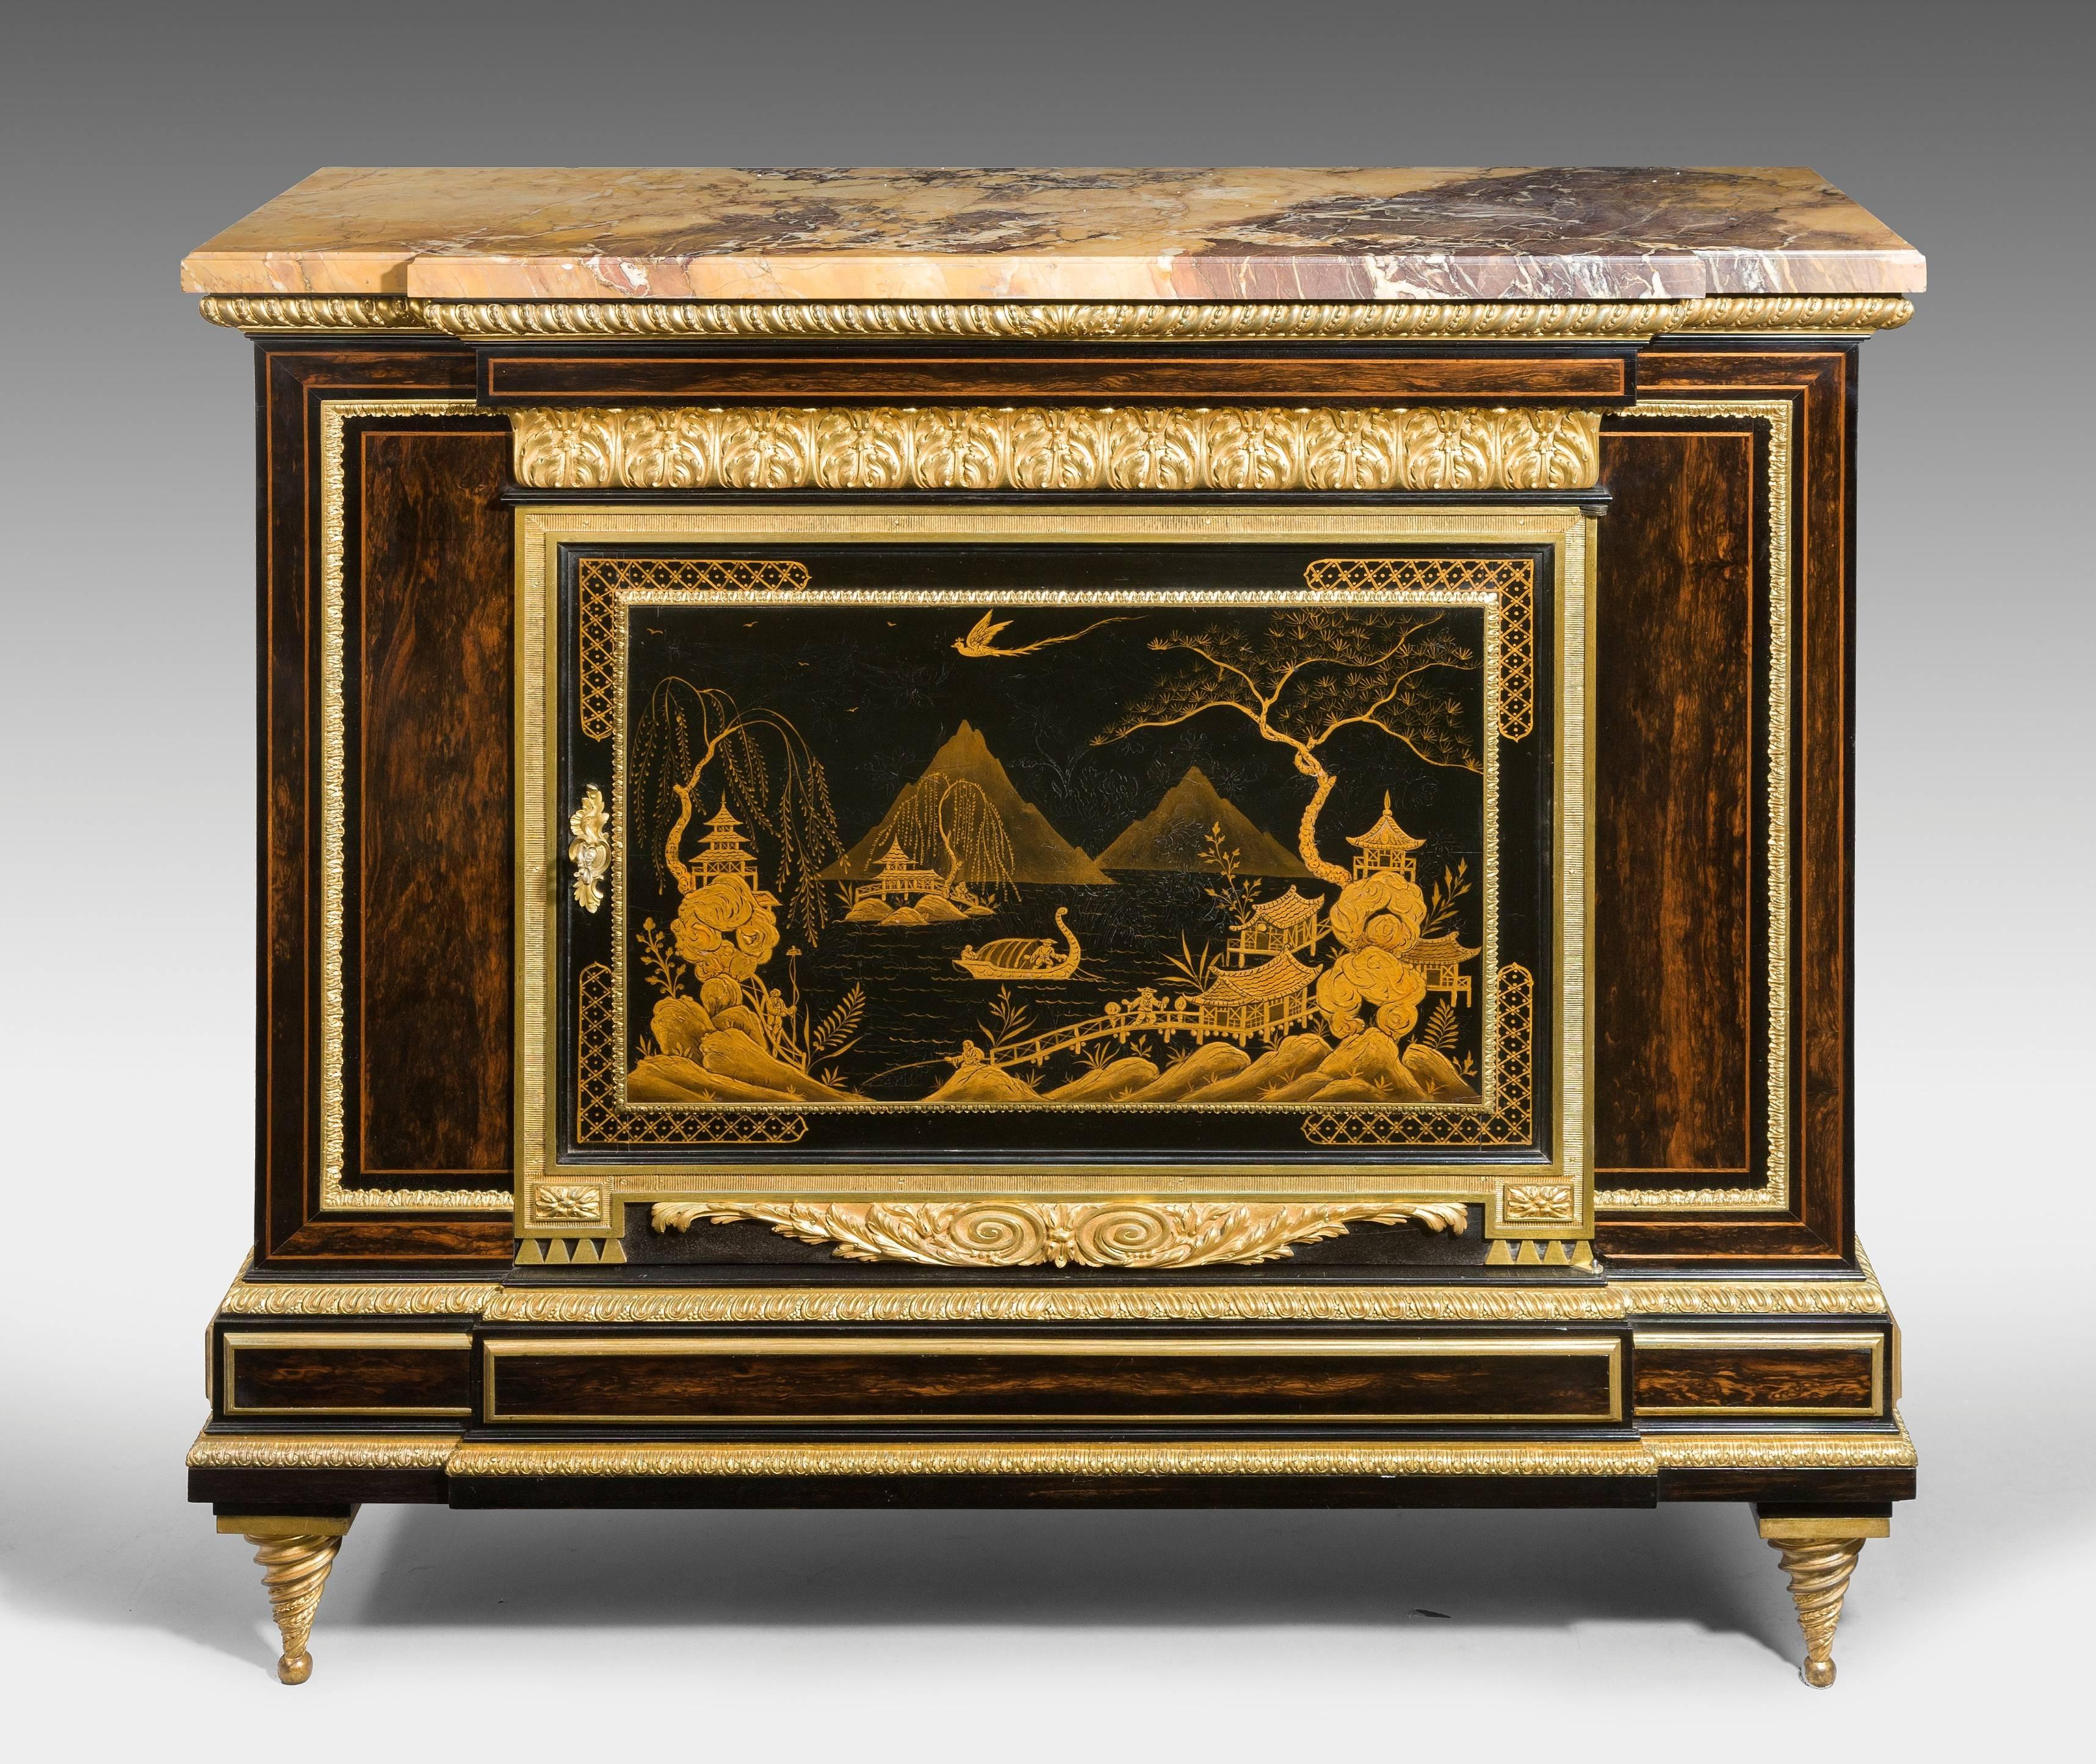 An exhibition quality Gillows Coromandel side cabinet.

The rectangular marble top above a central cupboard door with an English decorated japanned panel in the Chinese taste, with a gilt landscape on a black ground, applied with superb quality